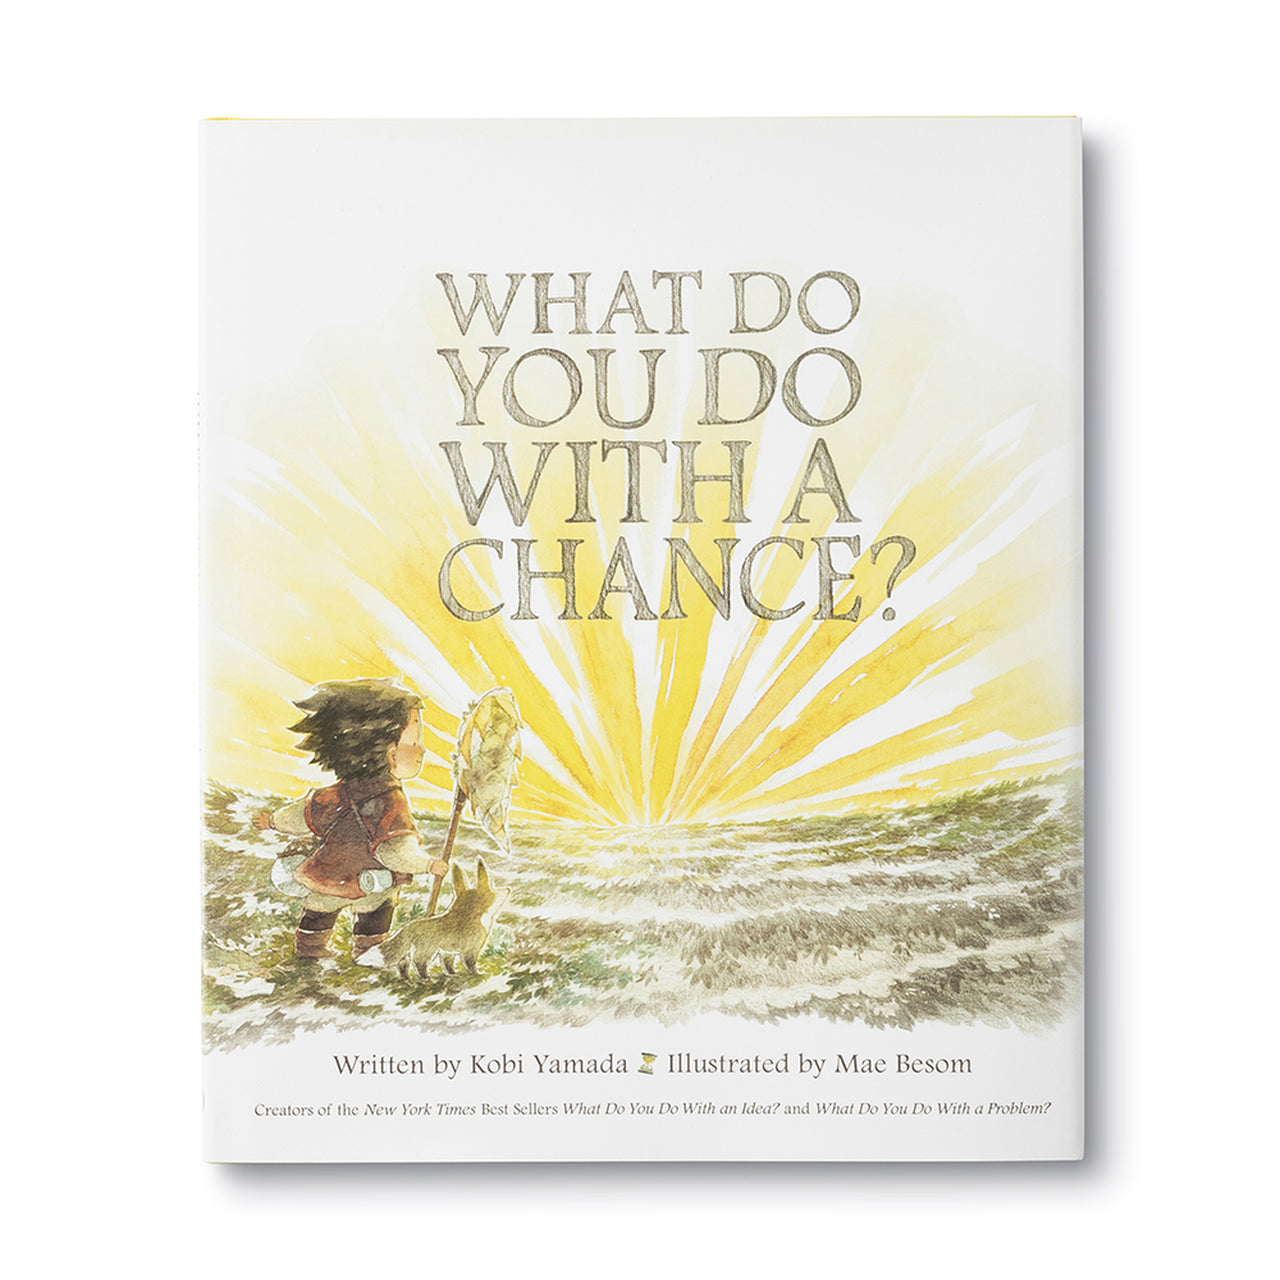 What Do You Do With a Chance? - Gift Book